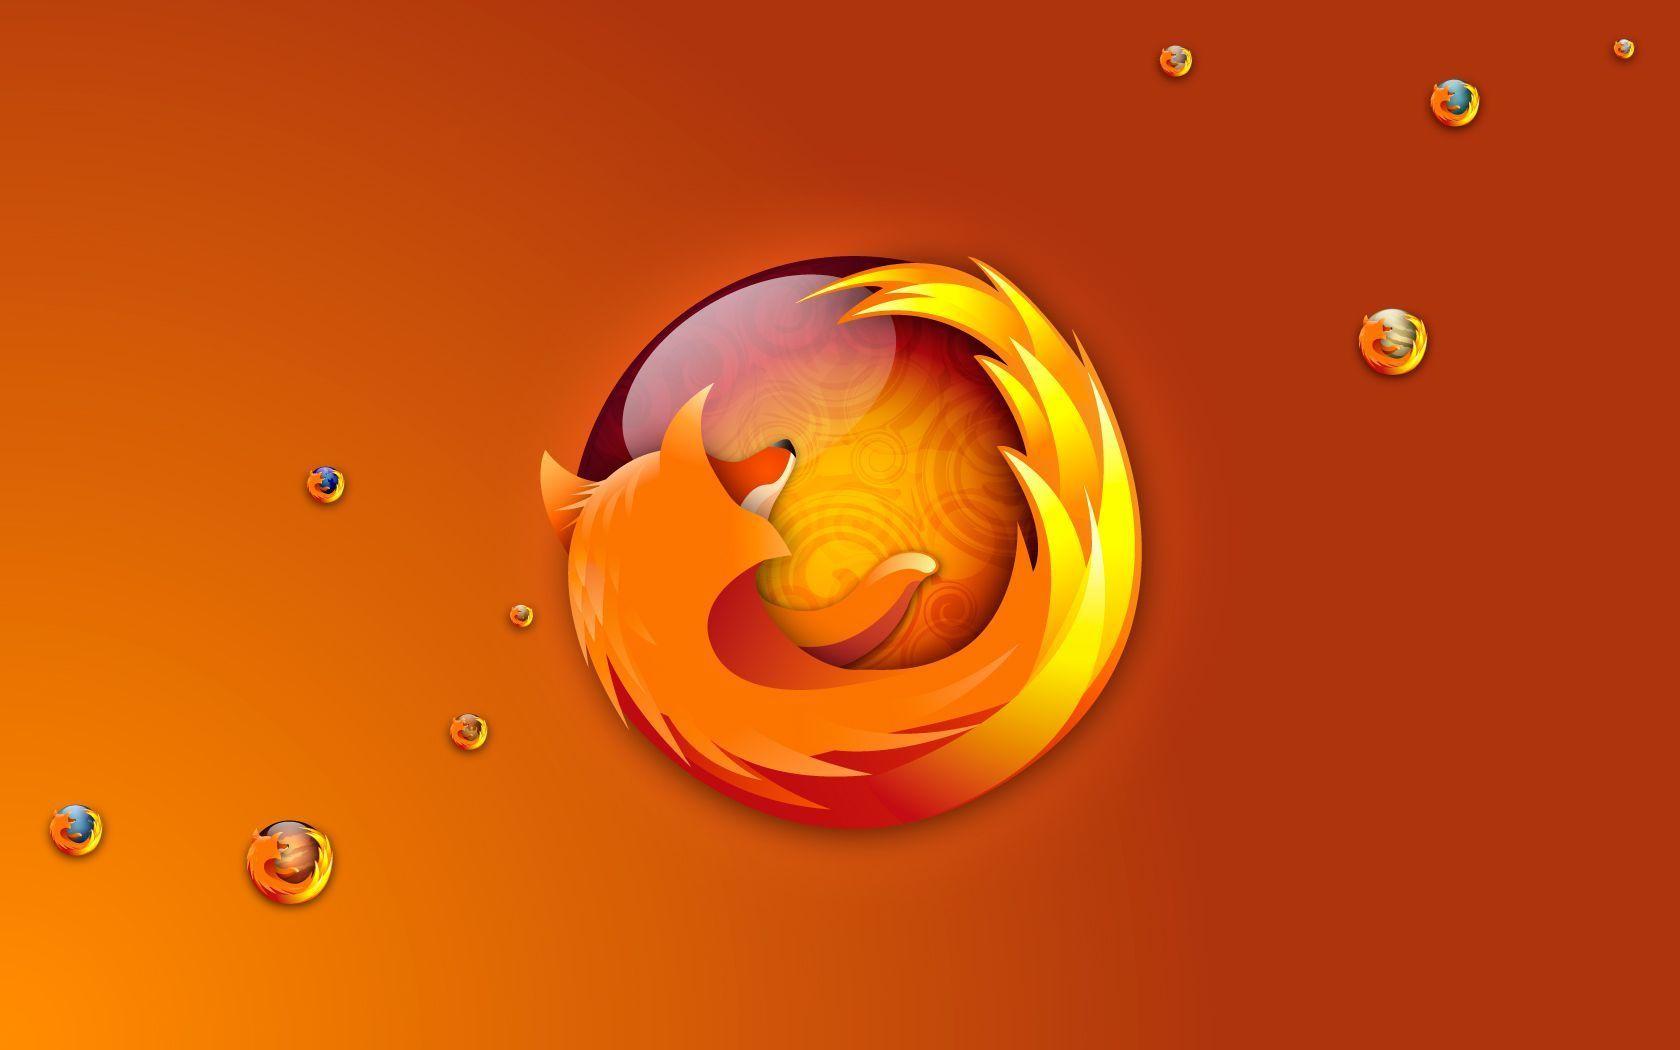 firefox 3.0 download for mac